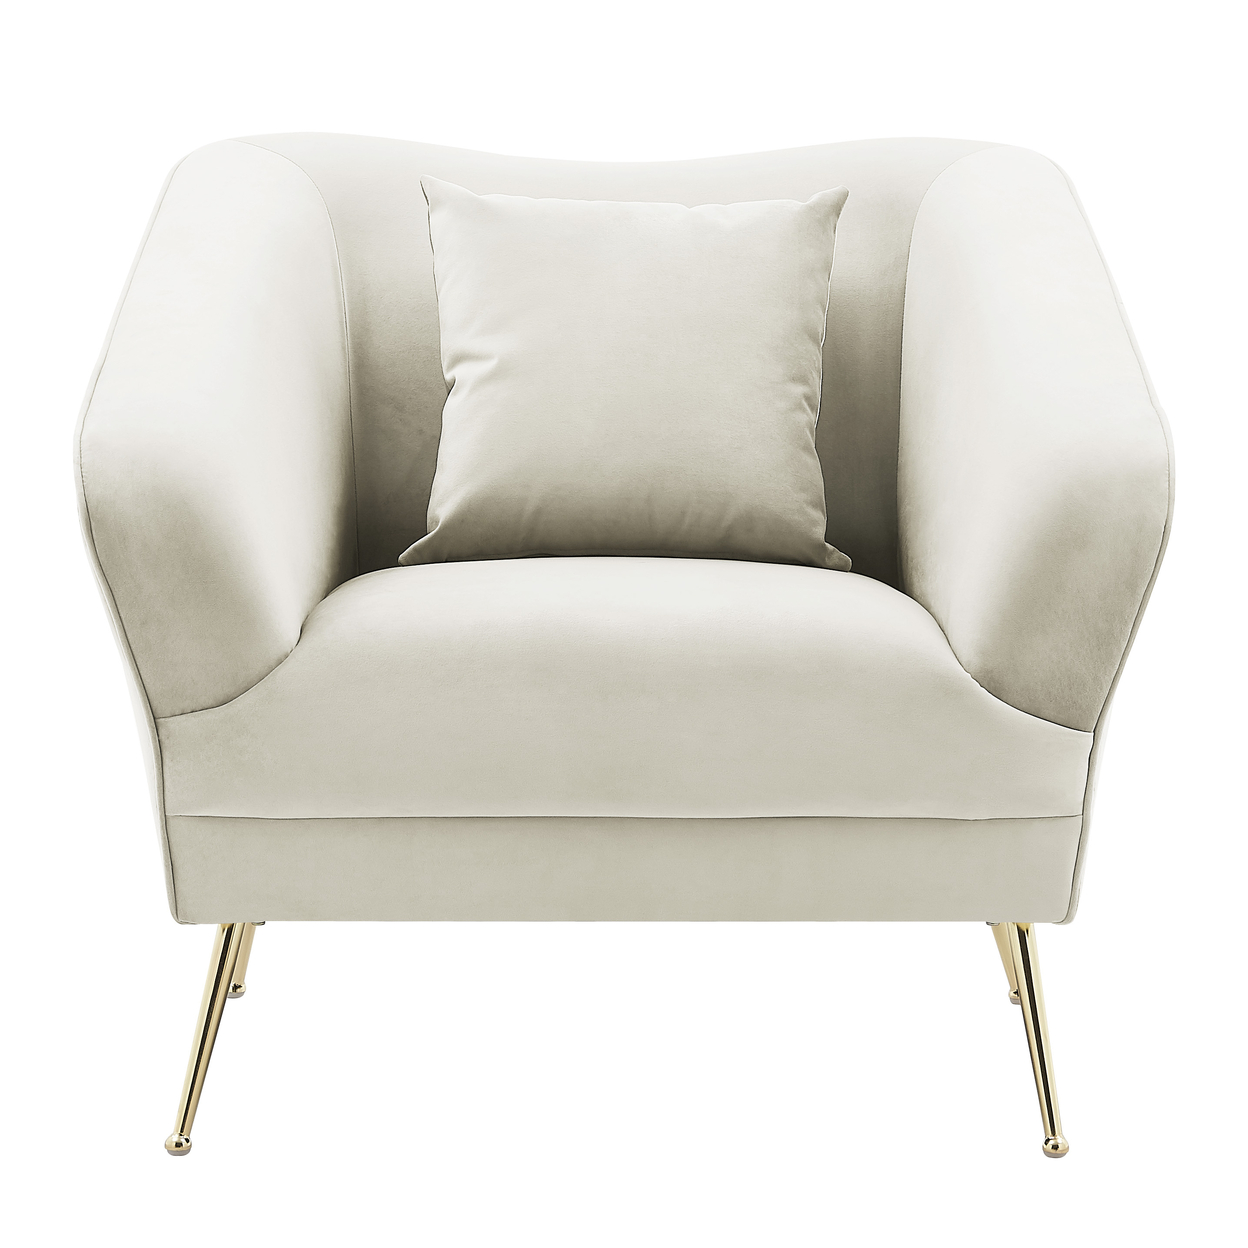 Iconic Home Ember Club Chair Velvet Upholstered Tight Seat Back Design Flared Gold Tone Metal Legs With Decorative Pillow - Grey